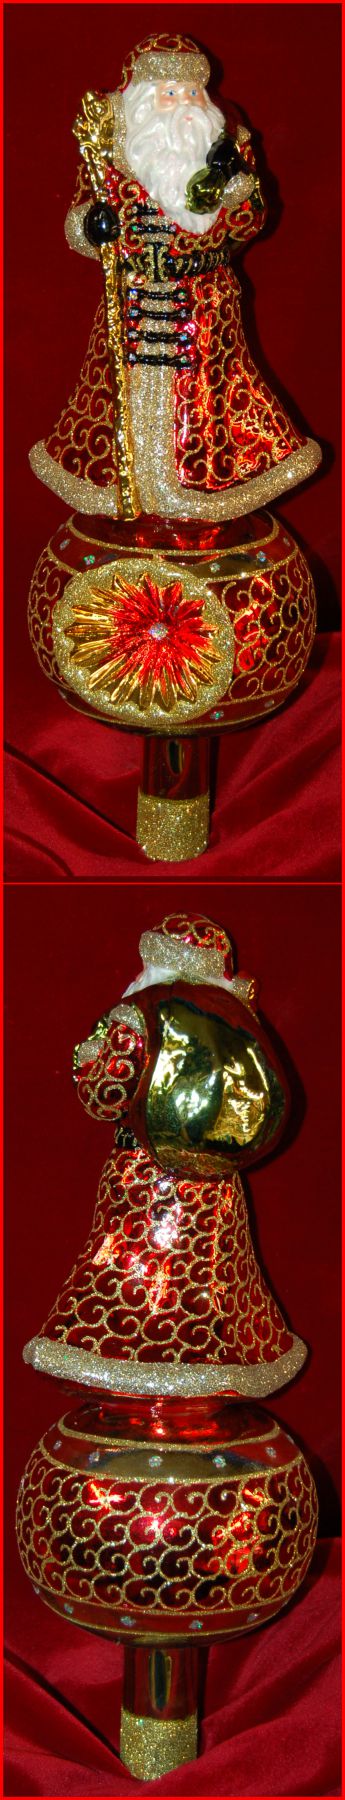 Santa Finial from Poland Personalized FREE by Russell Rhodes